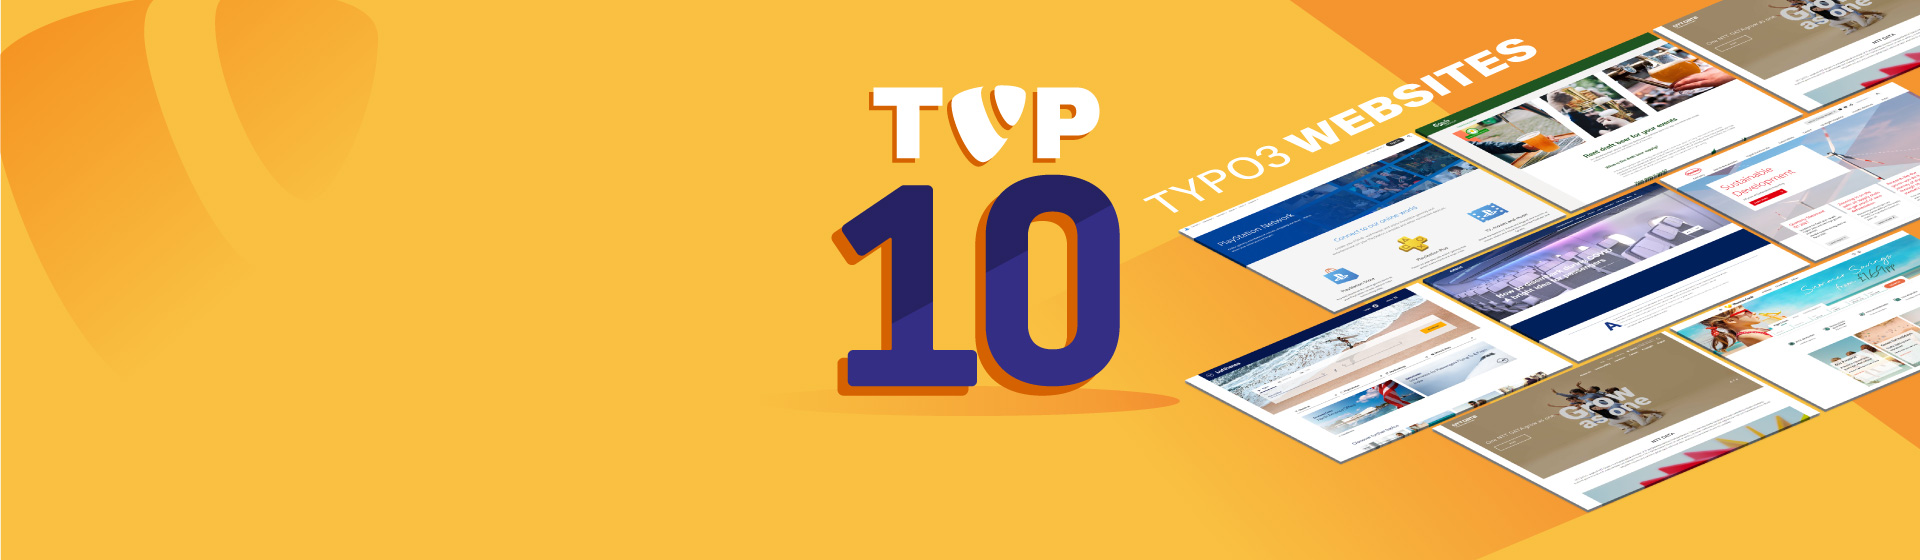 Top 10 Websites Built With TYPO3 CMS!